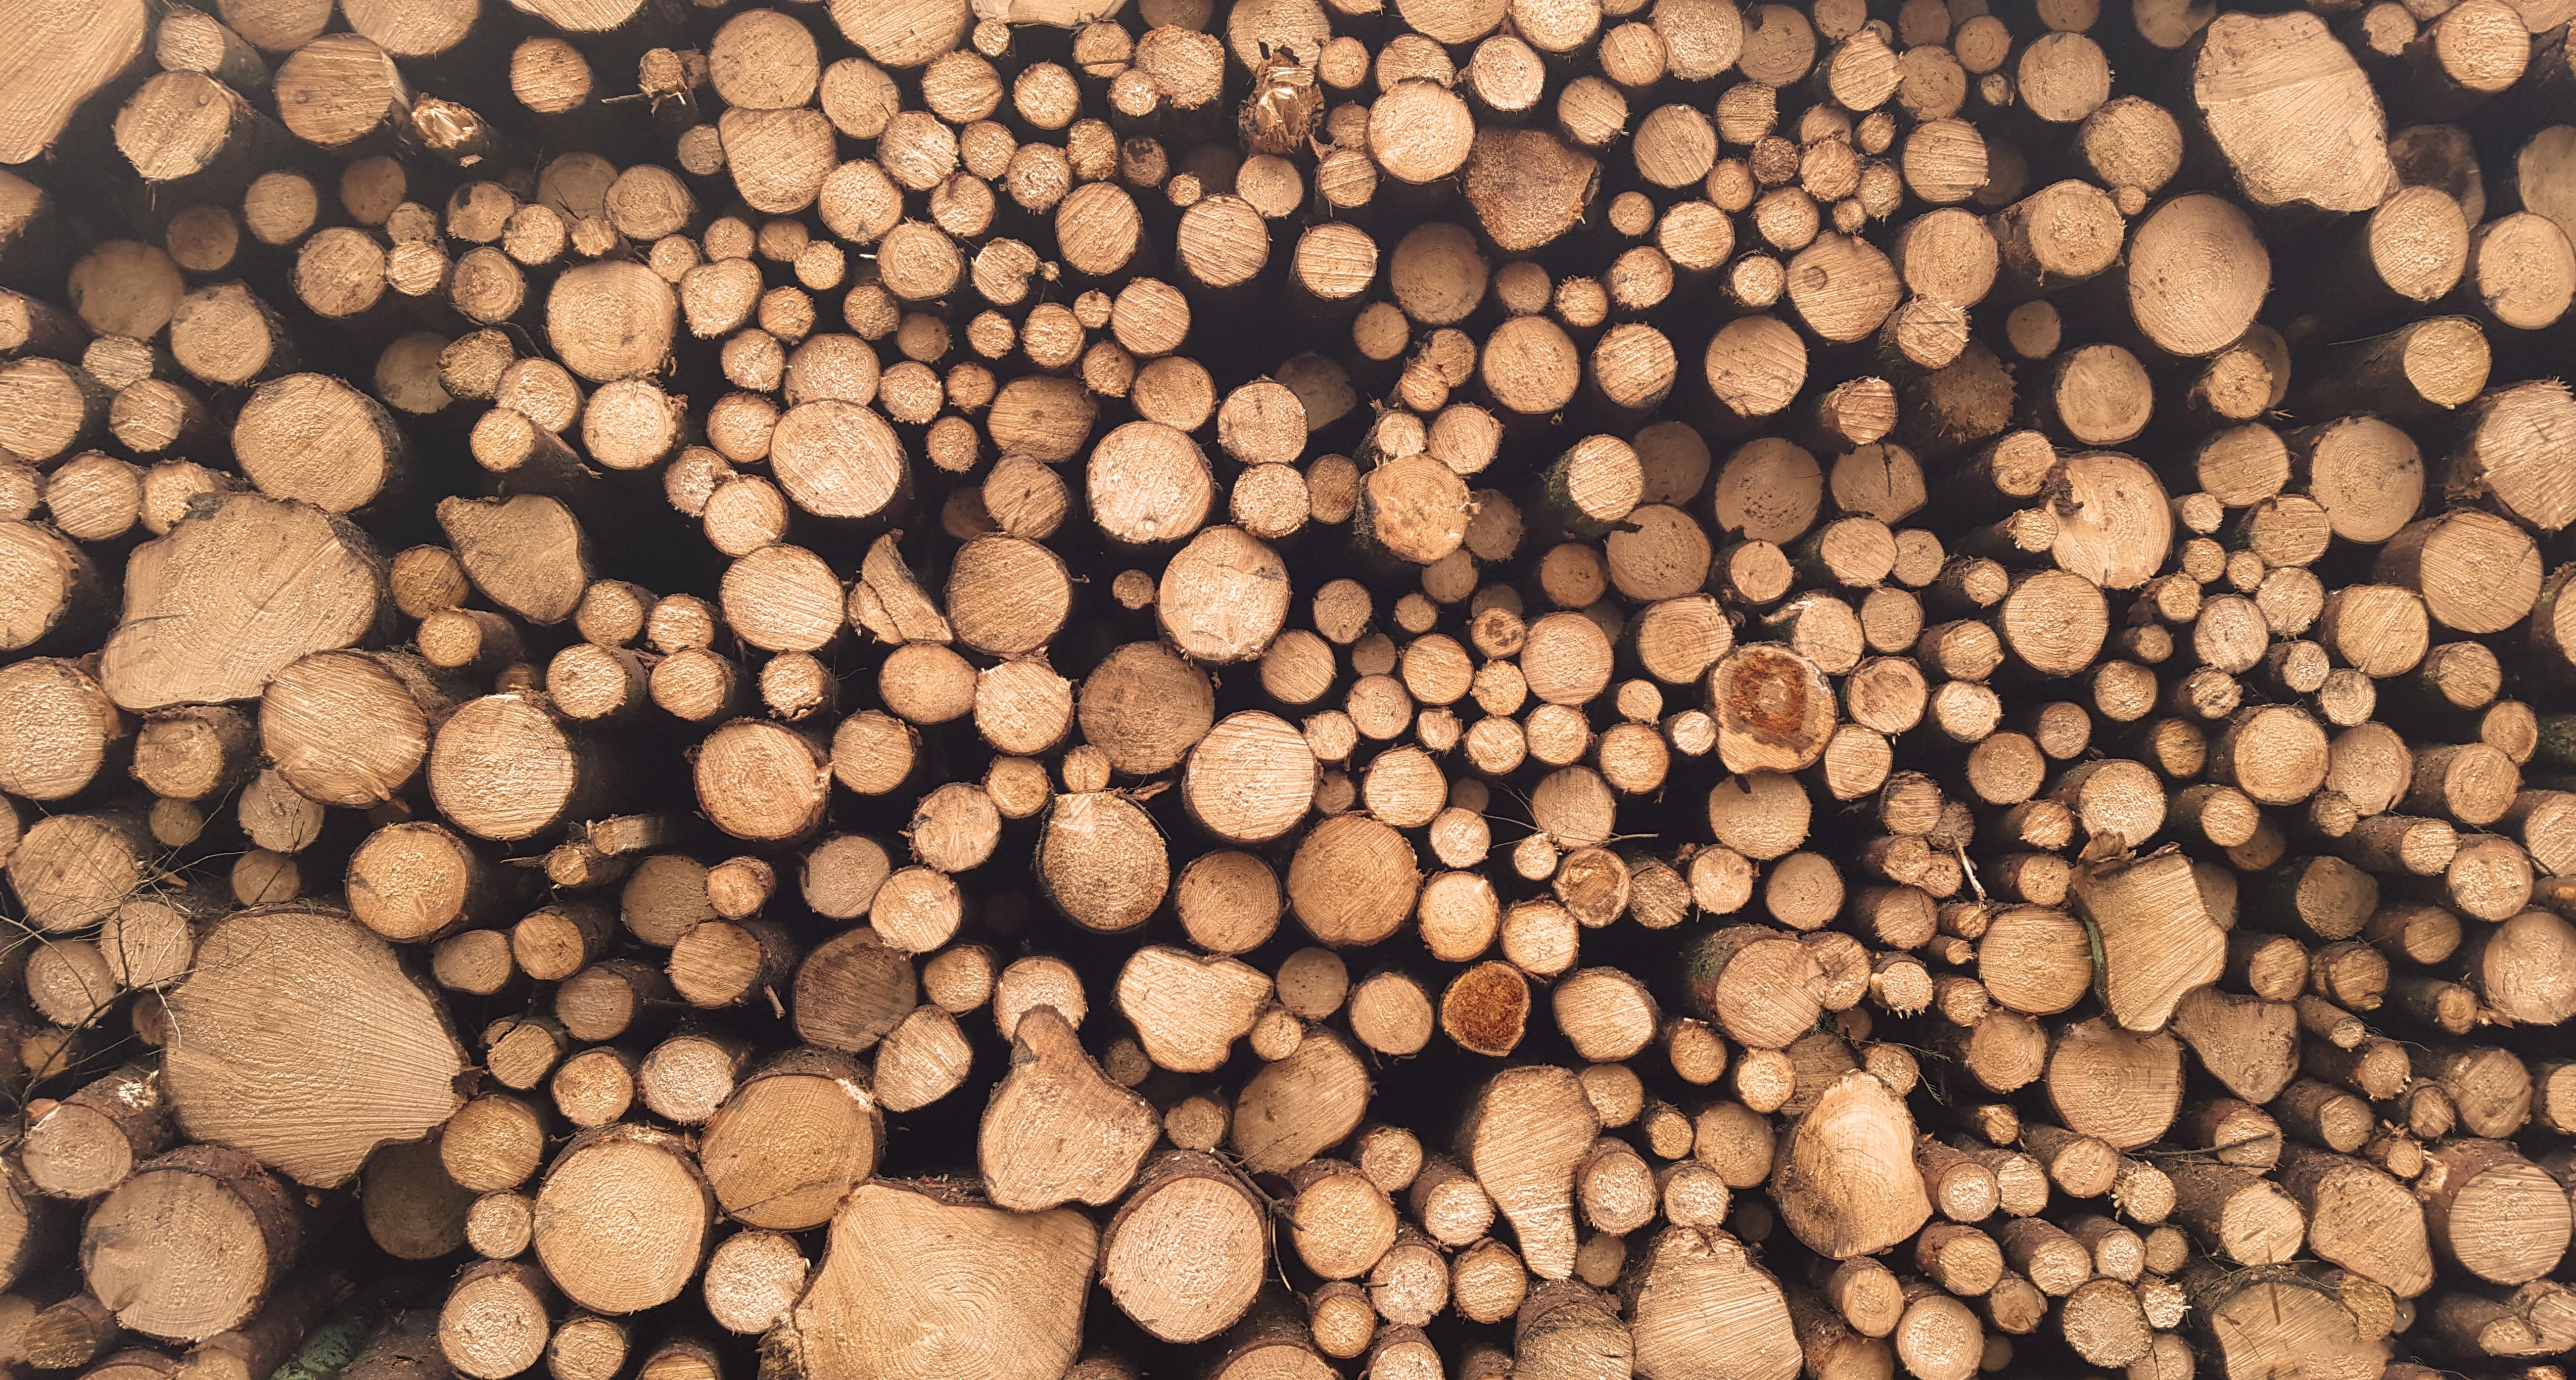 wood, pattern, large group of objects, stack, timber, log, firewood